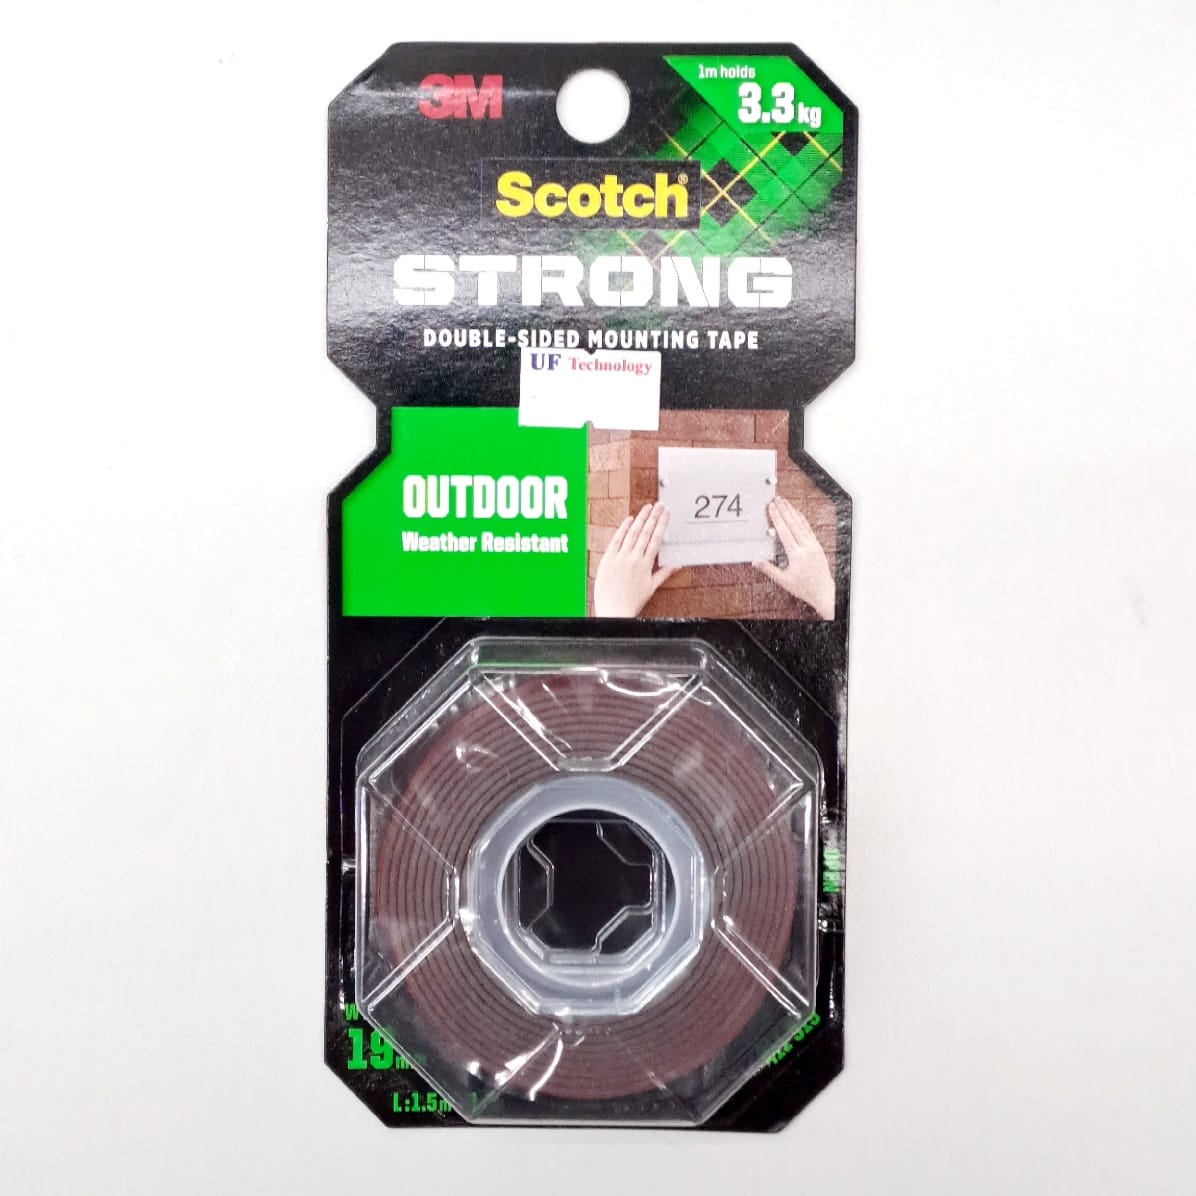 3M Scotch Outdoor Double-Sided Mounting Tape 19mmx1.5m 